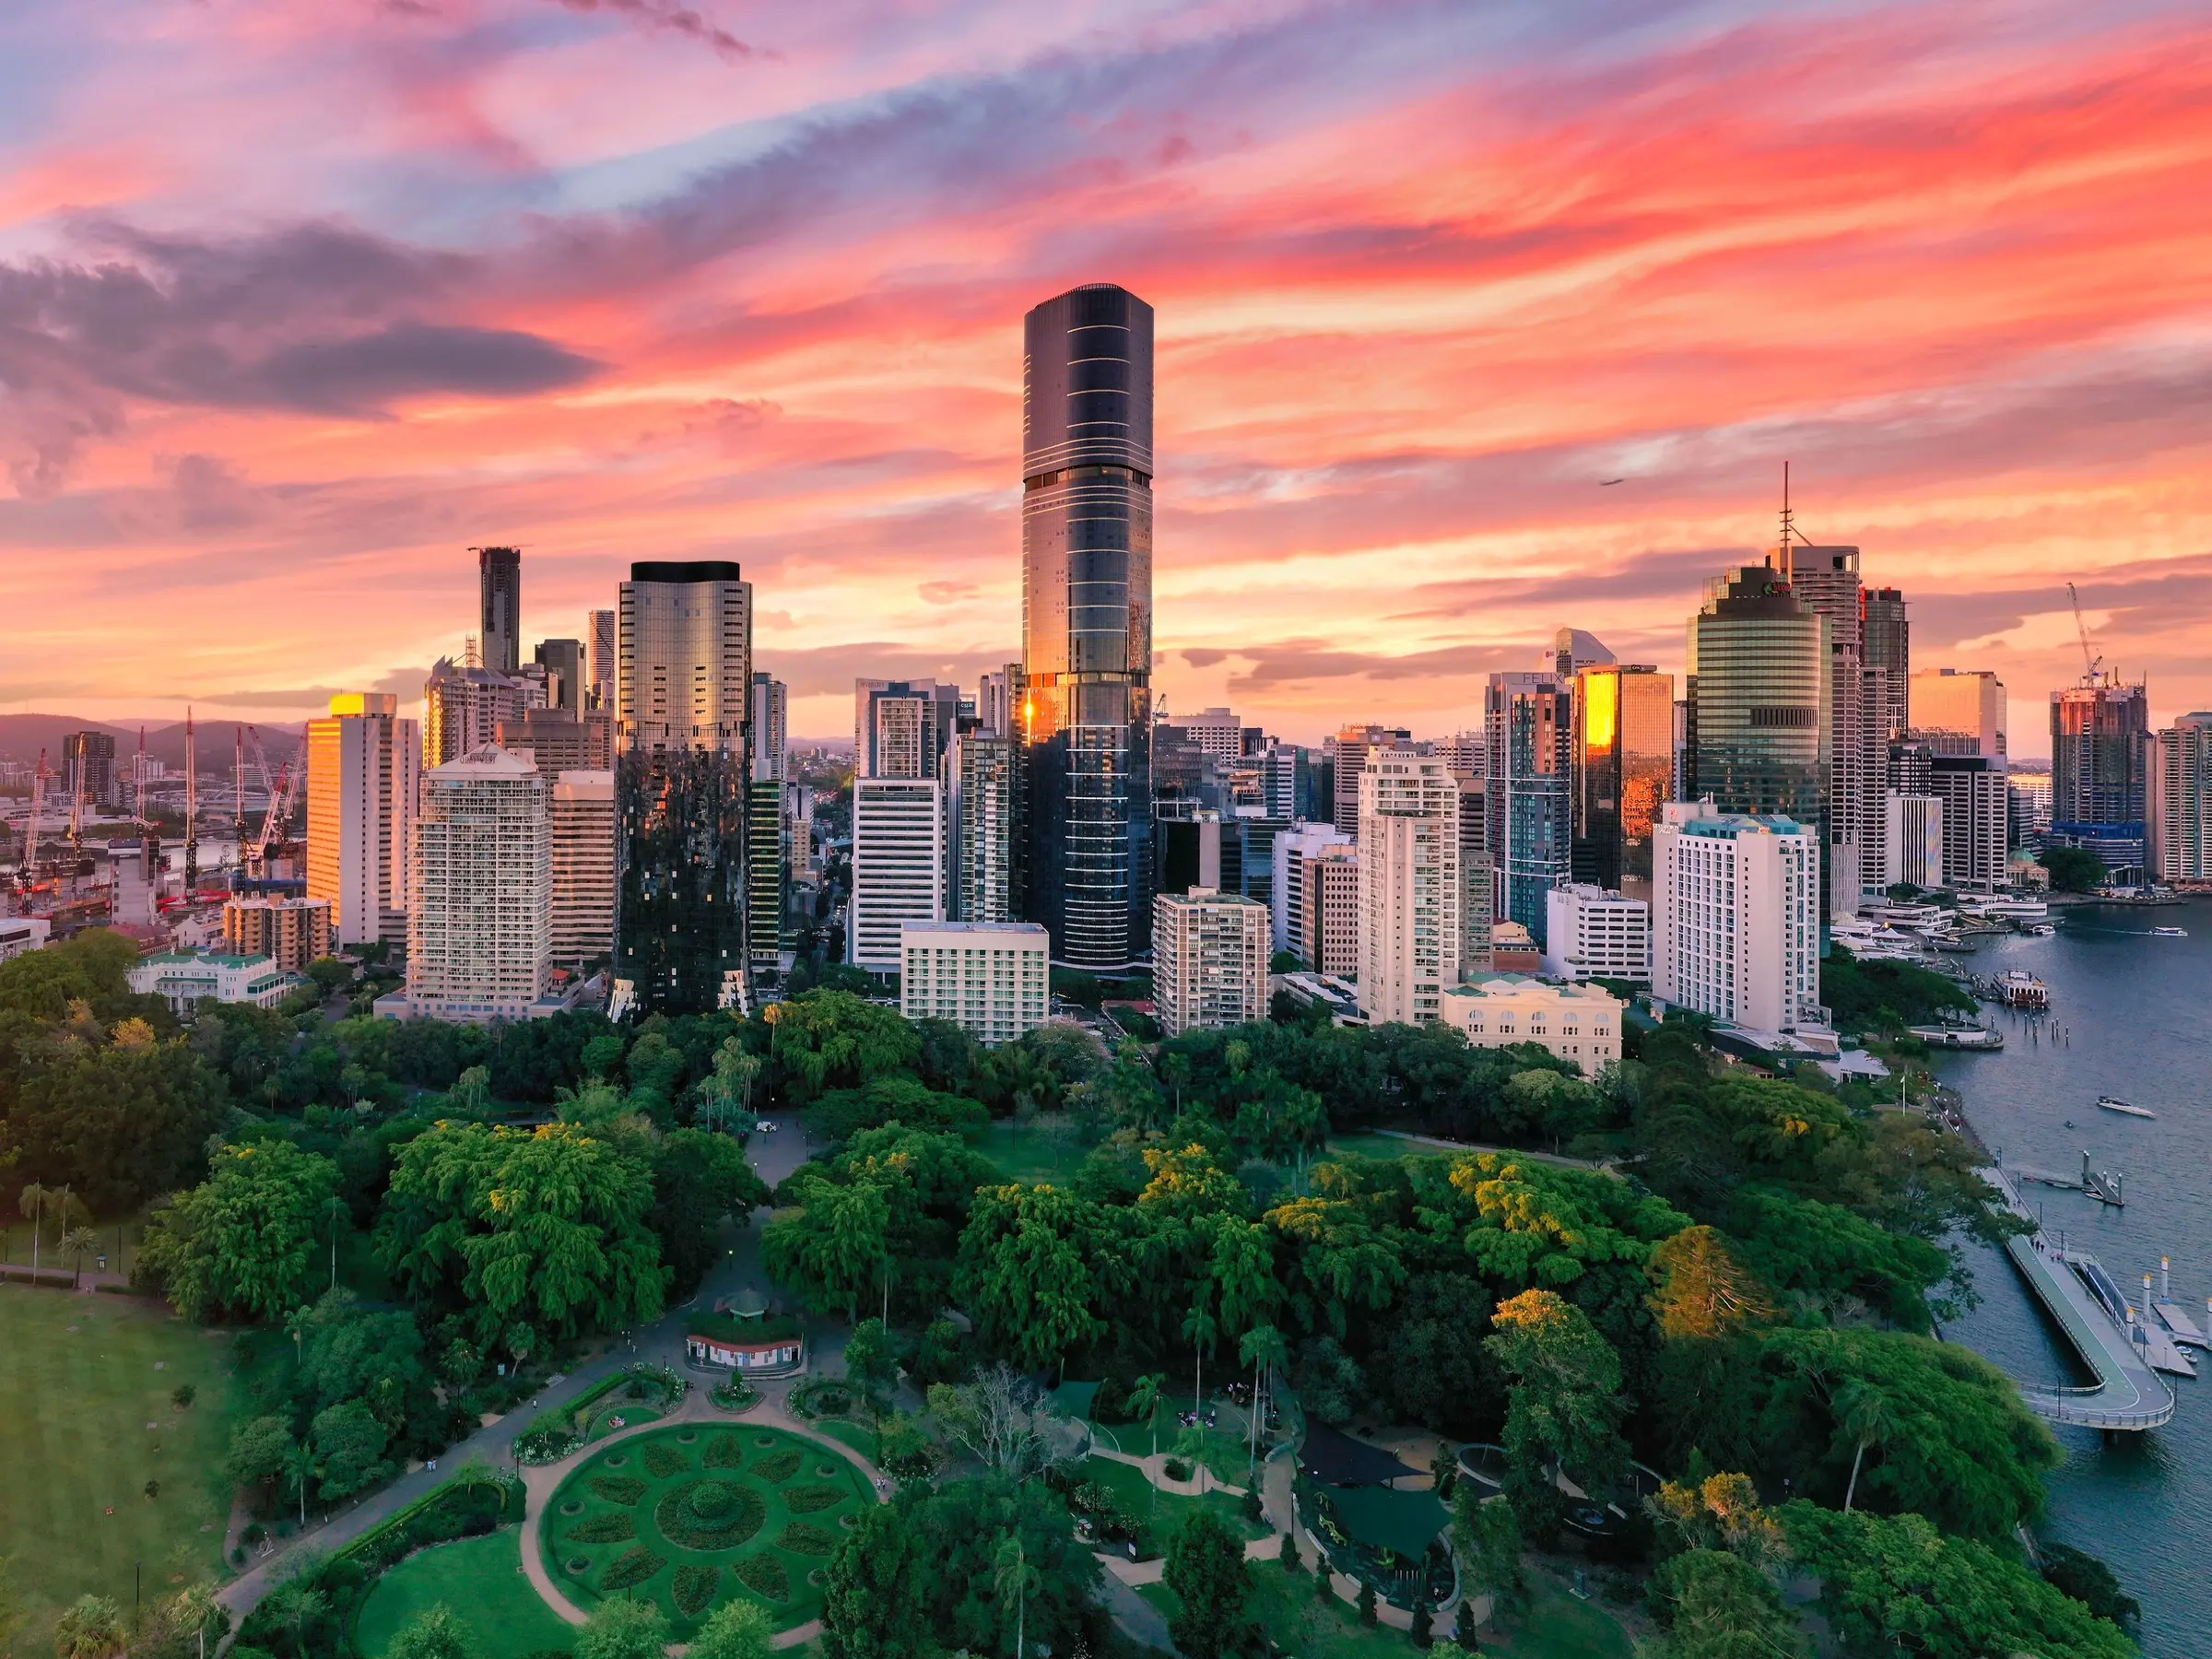 Aerial view of Botanic Gardens, Brisbane River and Brisbane CBD skyline at sunset. Image credit: Tourism and Events Queensland